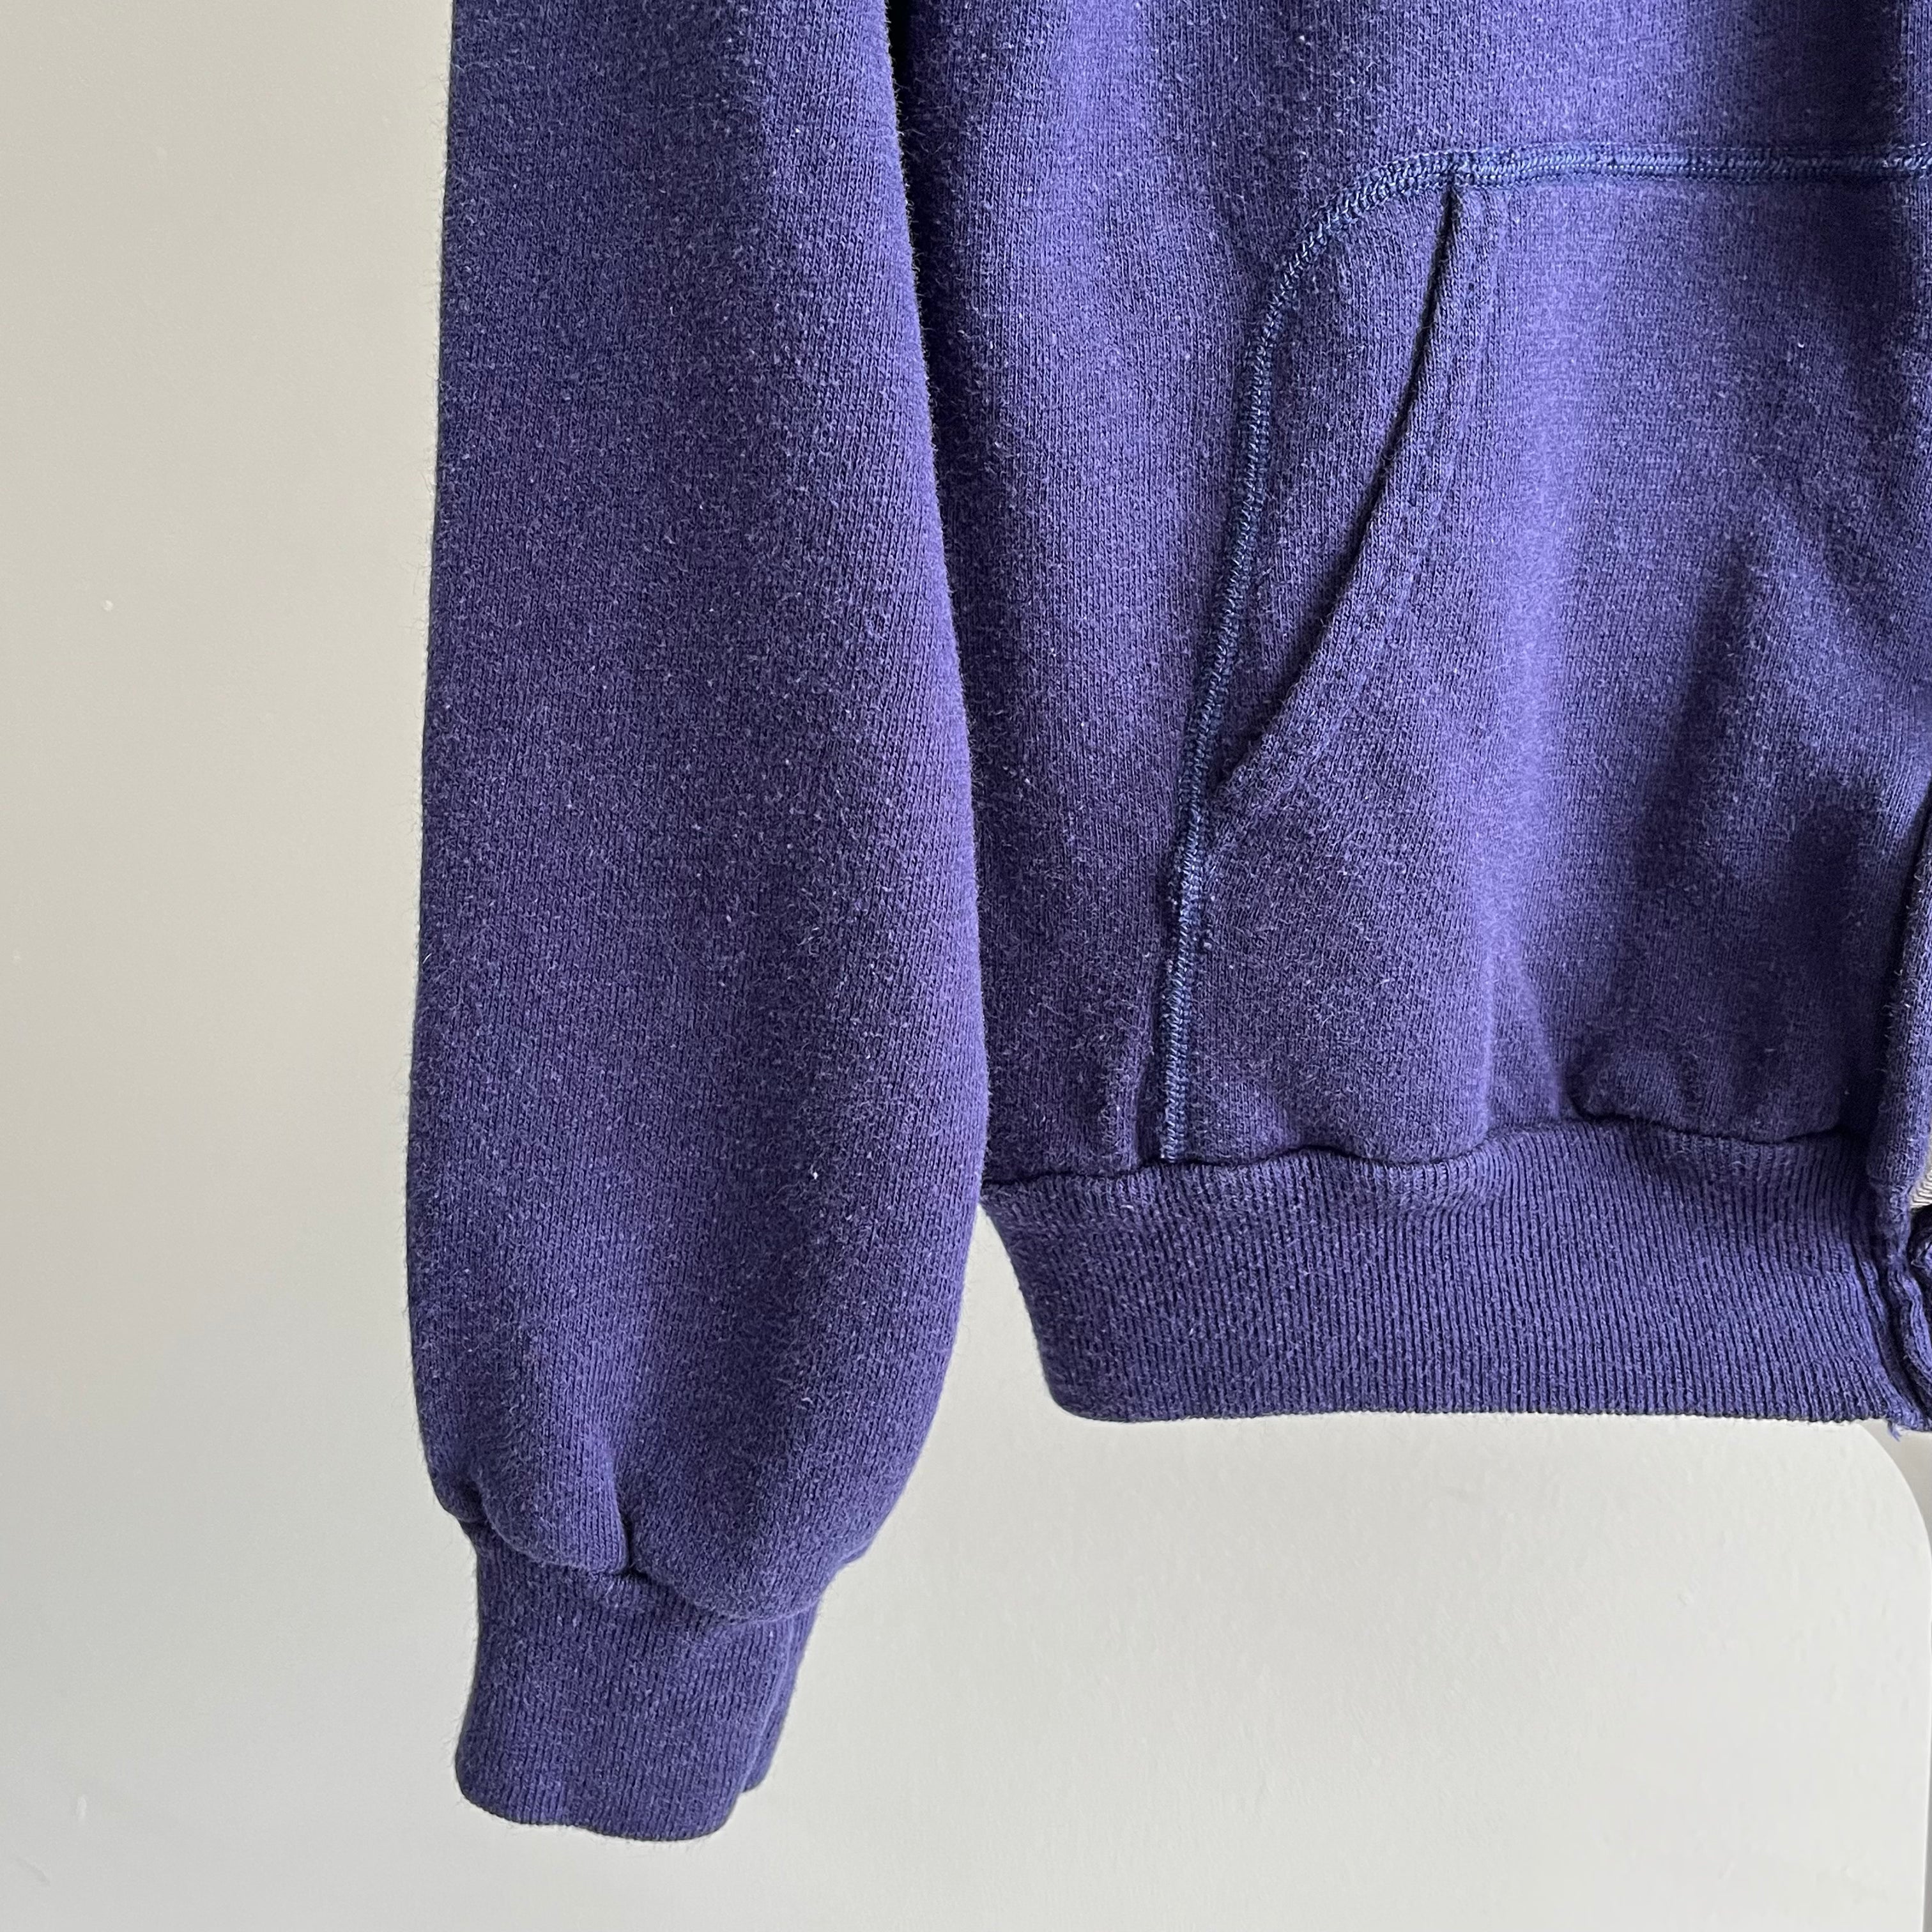 1970s Extra Special Navy Zip Up Hoodie - For Those Who Appreciate Luxury